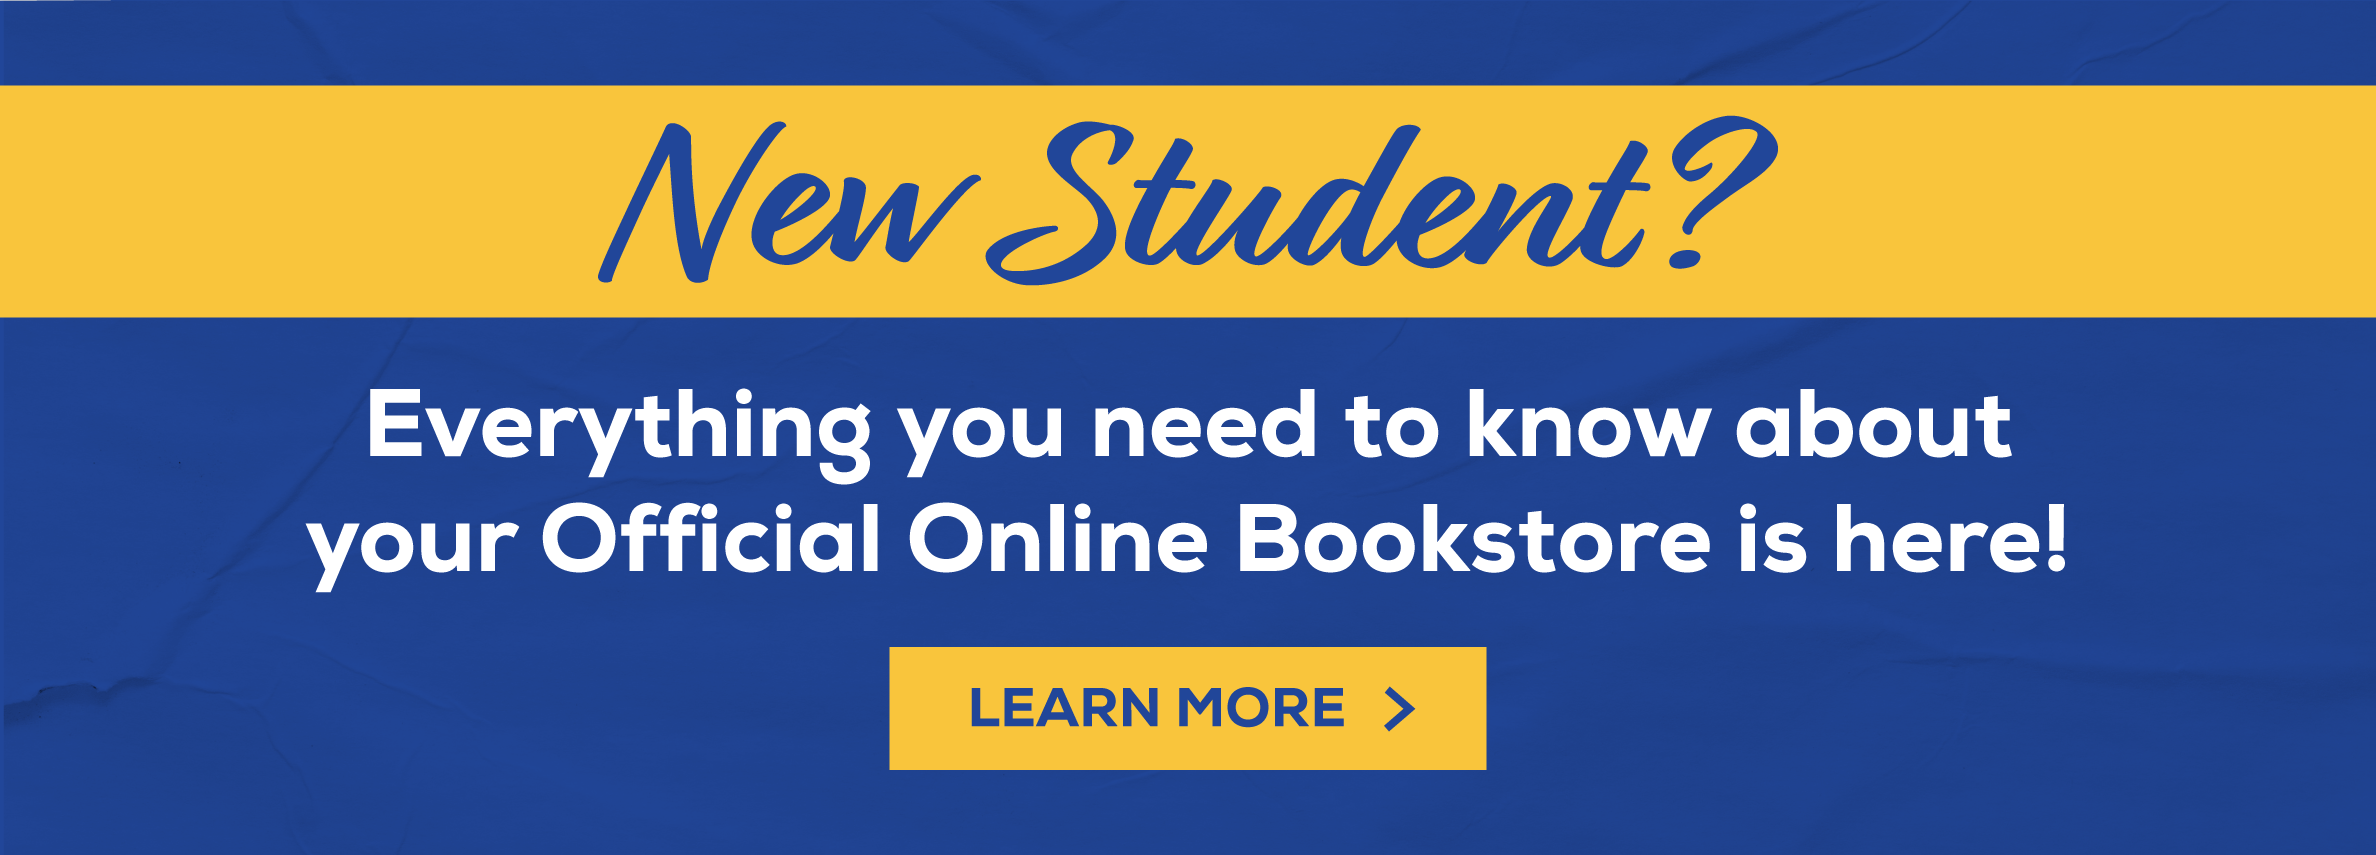 New Student?, Everything you need to know about your Official Online Bookstore is here!, Learn More (new tab)